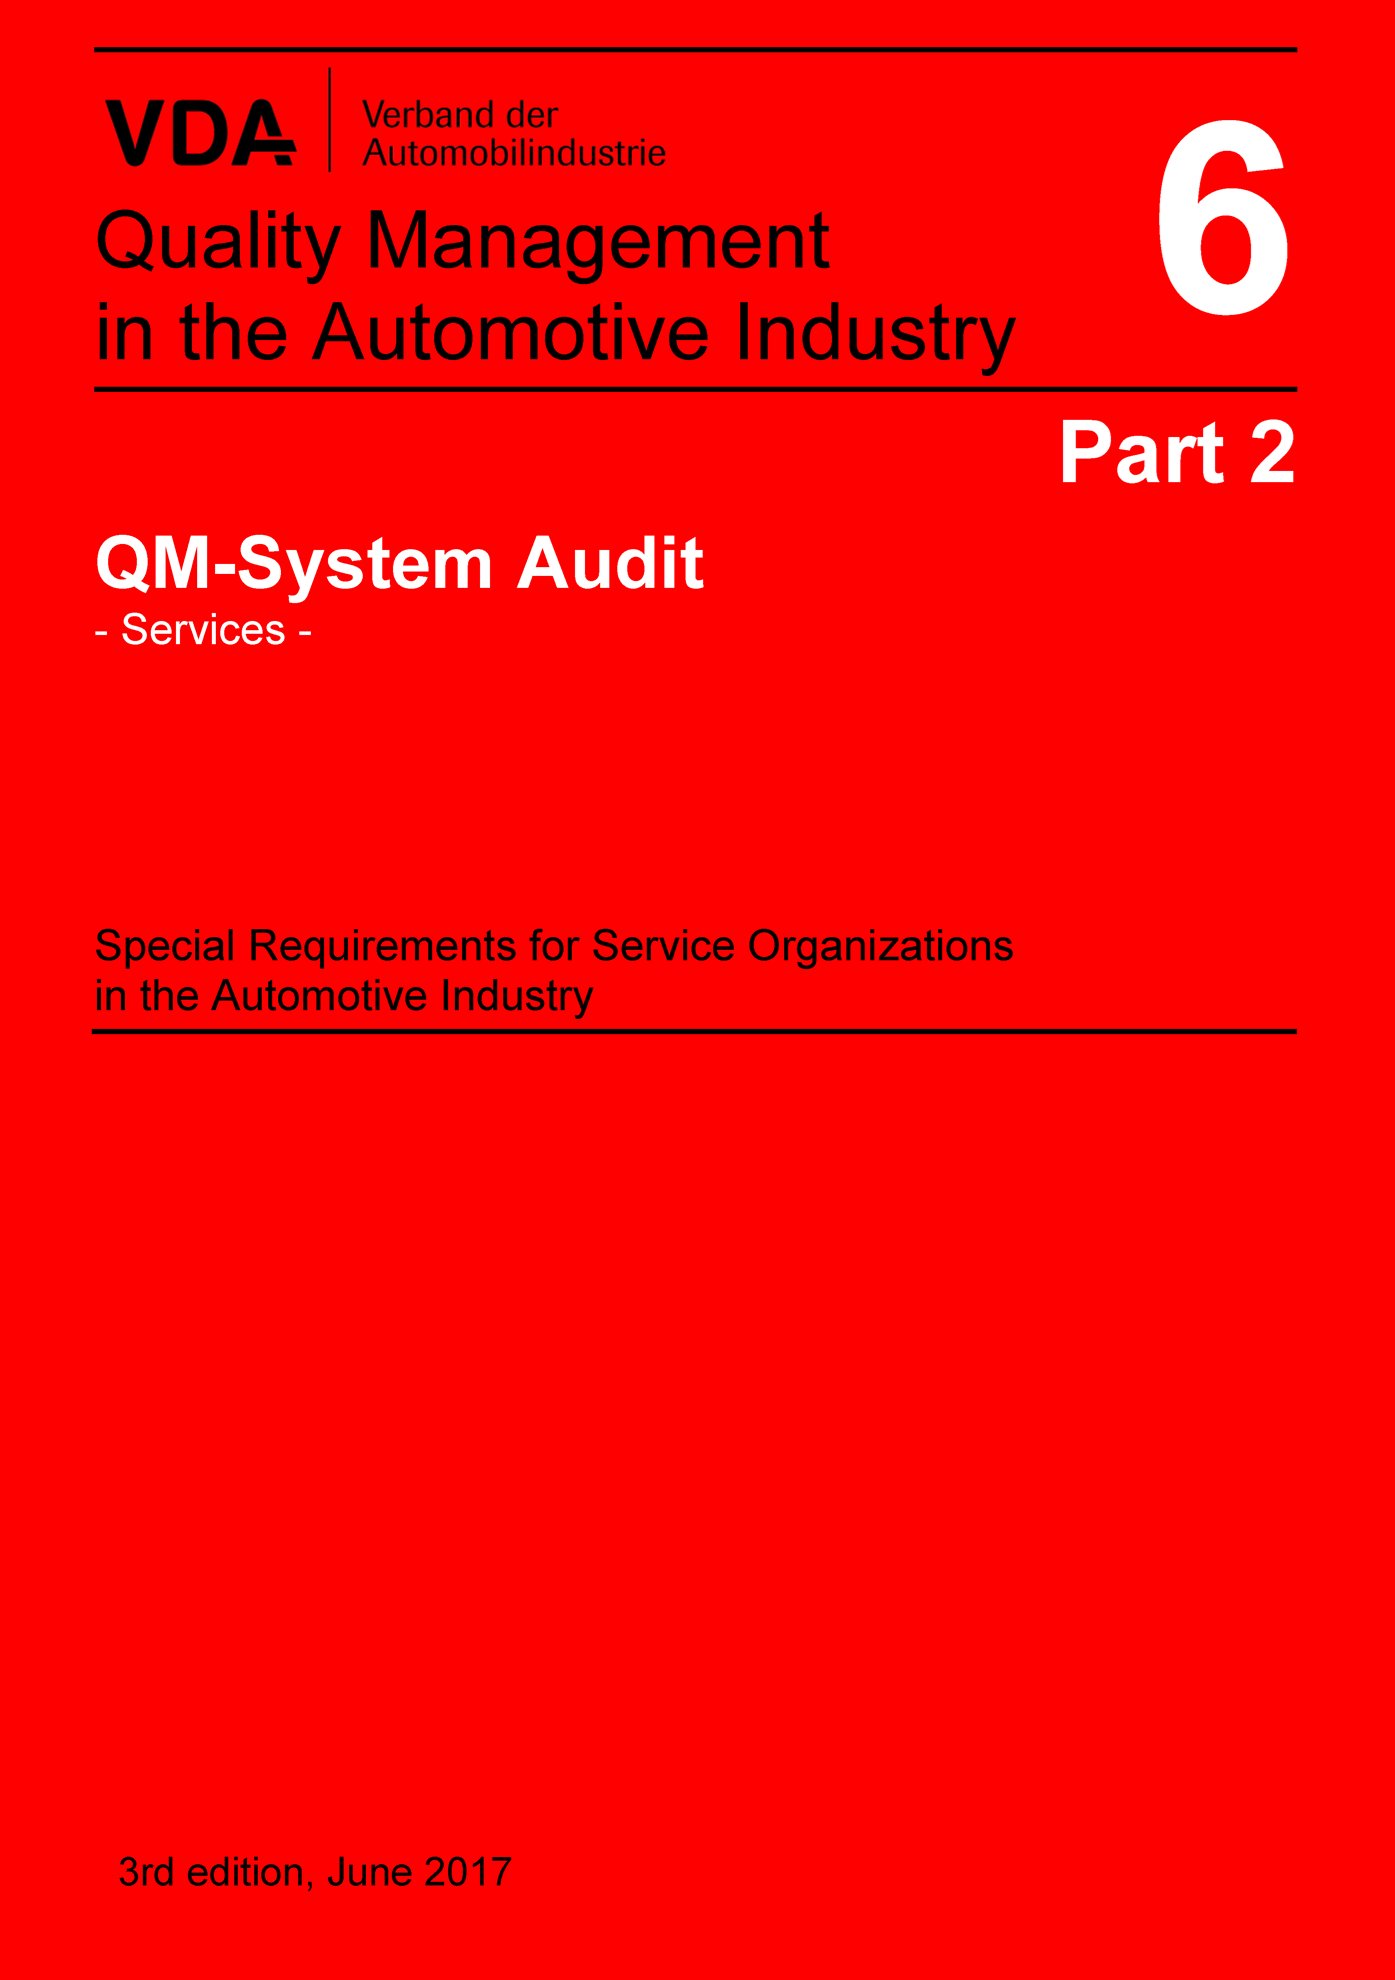 Náhľad  VDA Volume 6 Part 2_QM System Audit - Services -
 Special Requirements for Service Organizations in the Automotive Industry
 3rd Edition, June 2017 1.6.2017